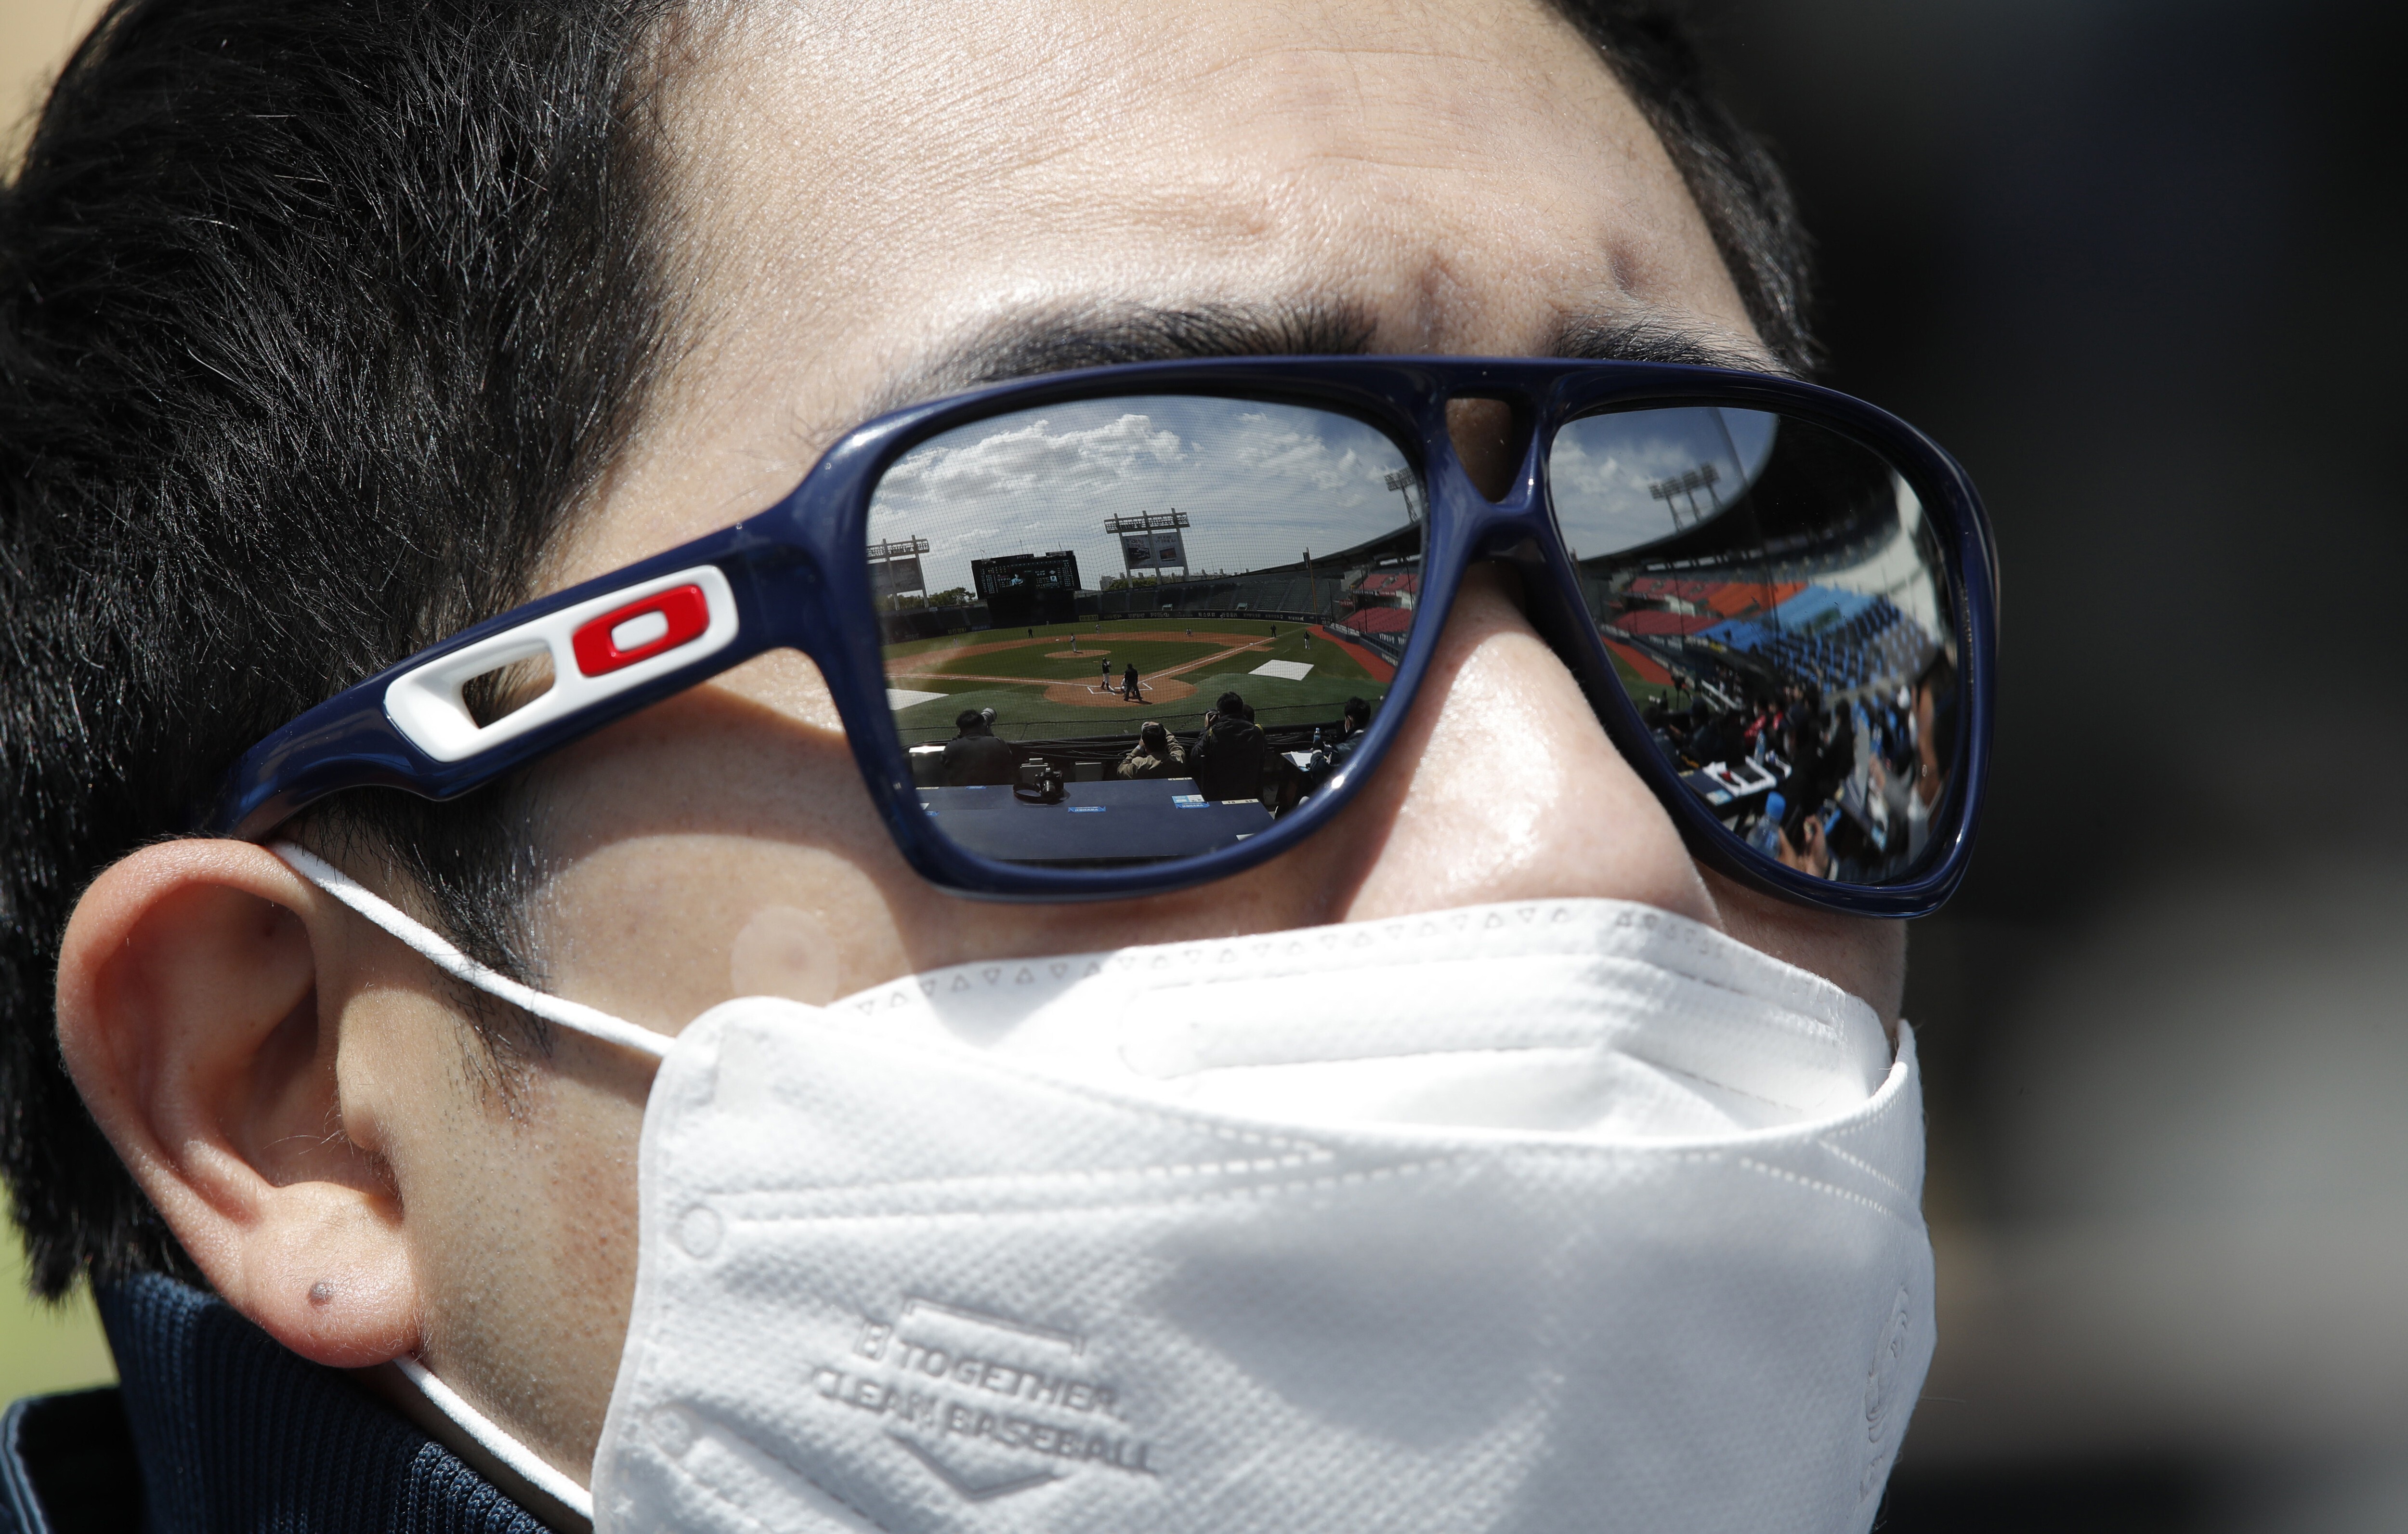 Empty spectator seats are reflected on the sunglasses of a team member wearing a mask as a precaution against the new coronavirus during the pre-season baseball game between Doosan Bears and LG Twins in Seoul, South Korea, Tuesday, April 21, 2020. South Korea's professional baseball league has decided to begin its new season on May 5, initially without fans, following a postponement over the coronavirus. (AP Photo/Lee Jin-man)